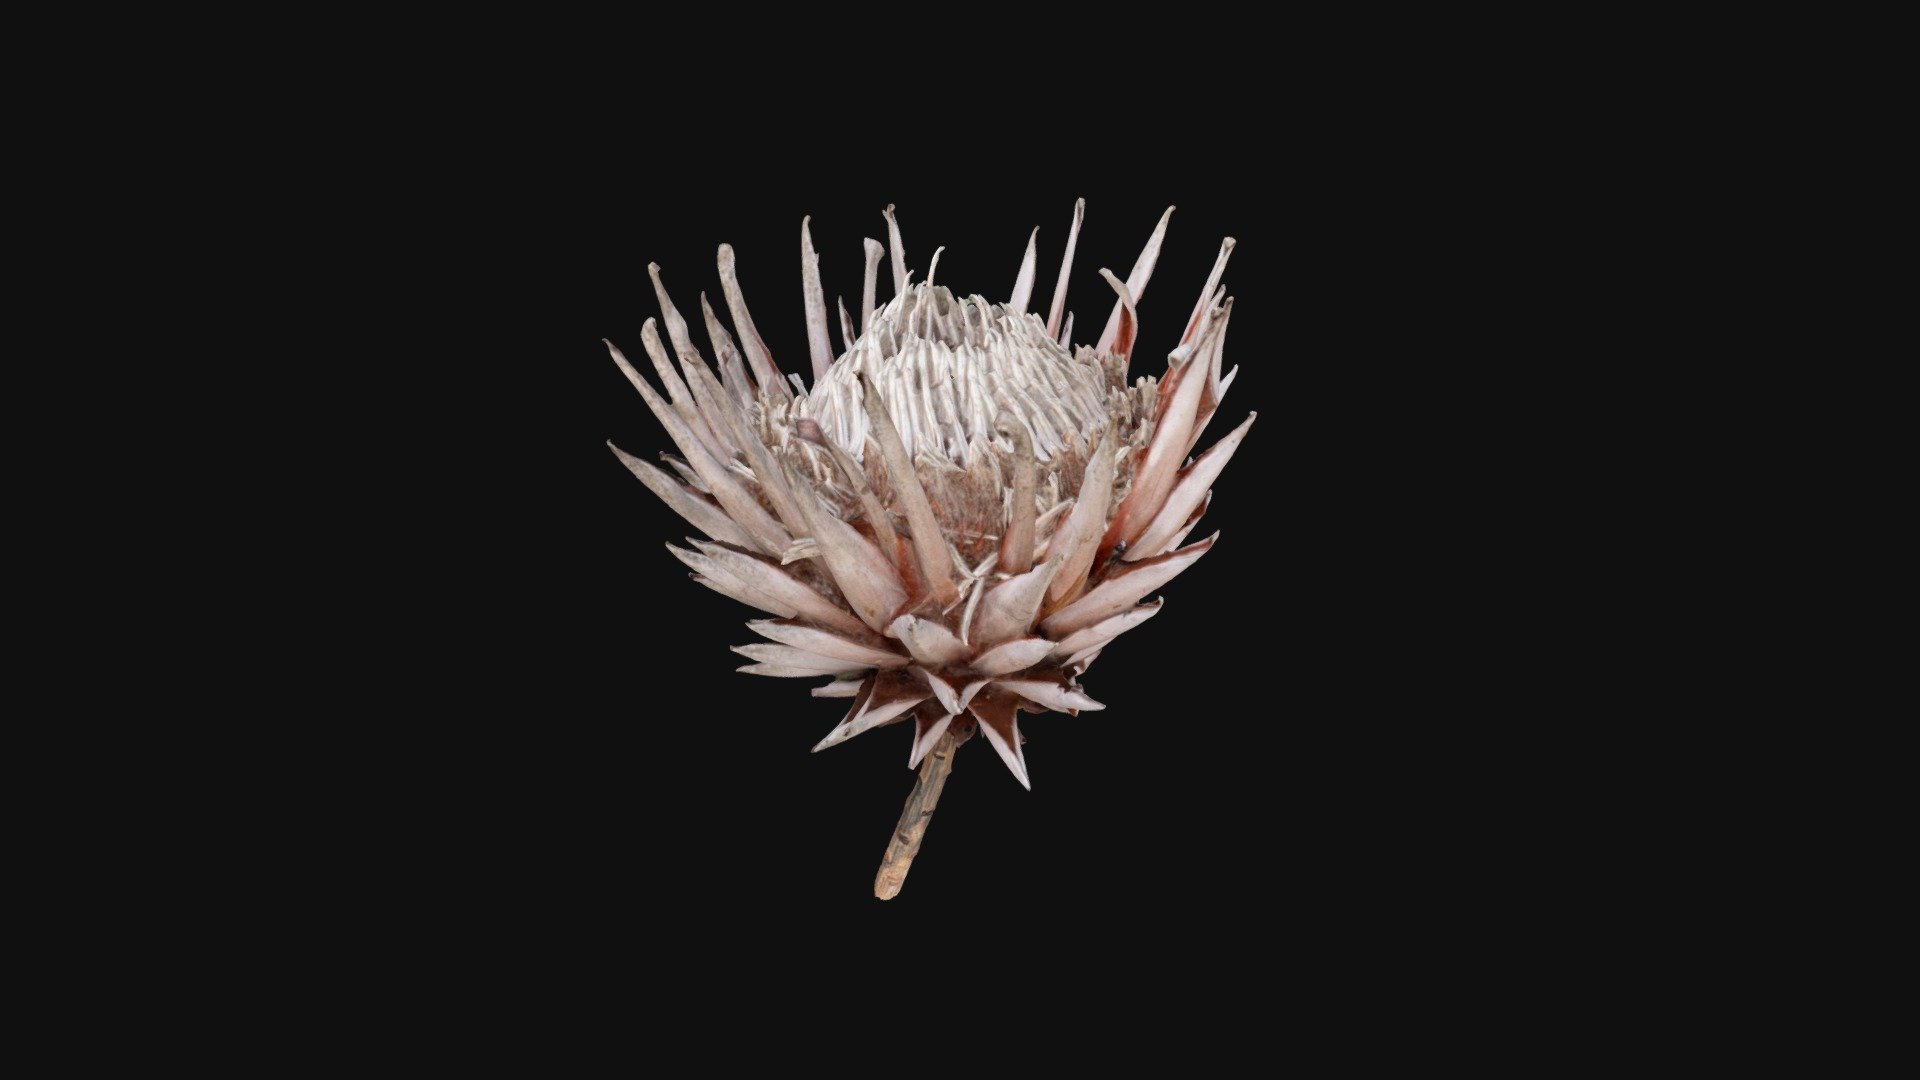 Dried King Protea from the Cape Floral Kingdom, South Africa

Created with Sony AR7ii using 70 images in outdoor overcast lighting conditions - Protea flower - 3D model by The Rock Art Portal (@Rock_Art_Portal) 3d model